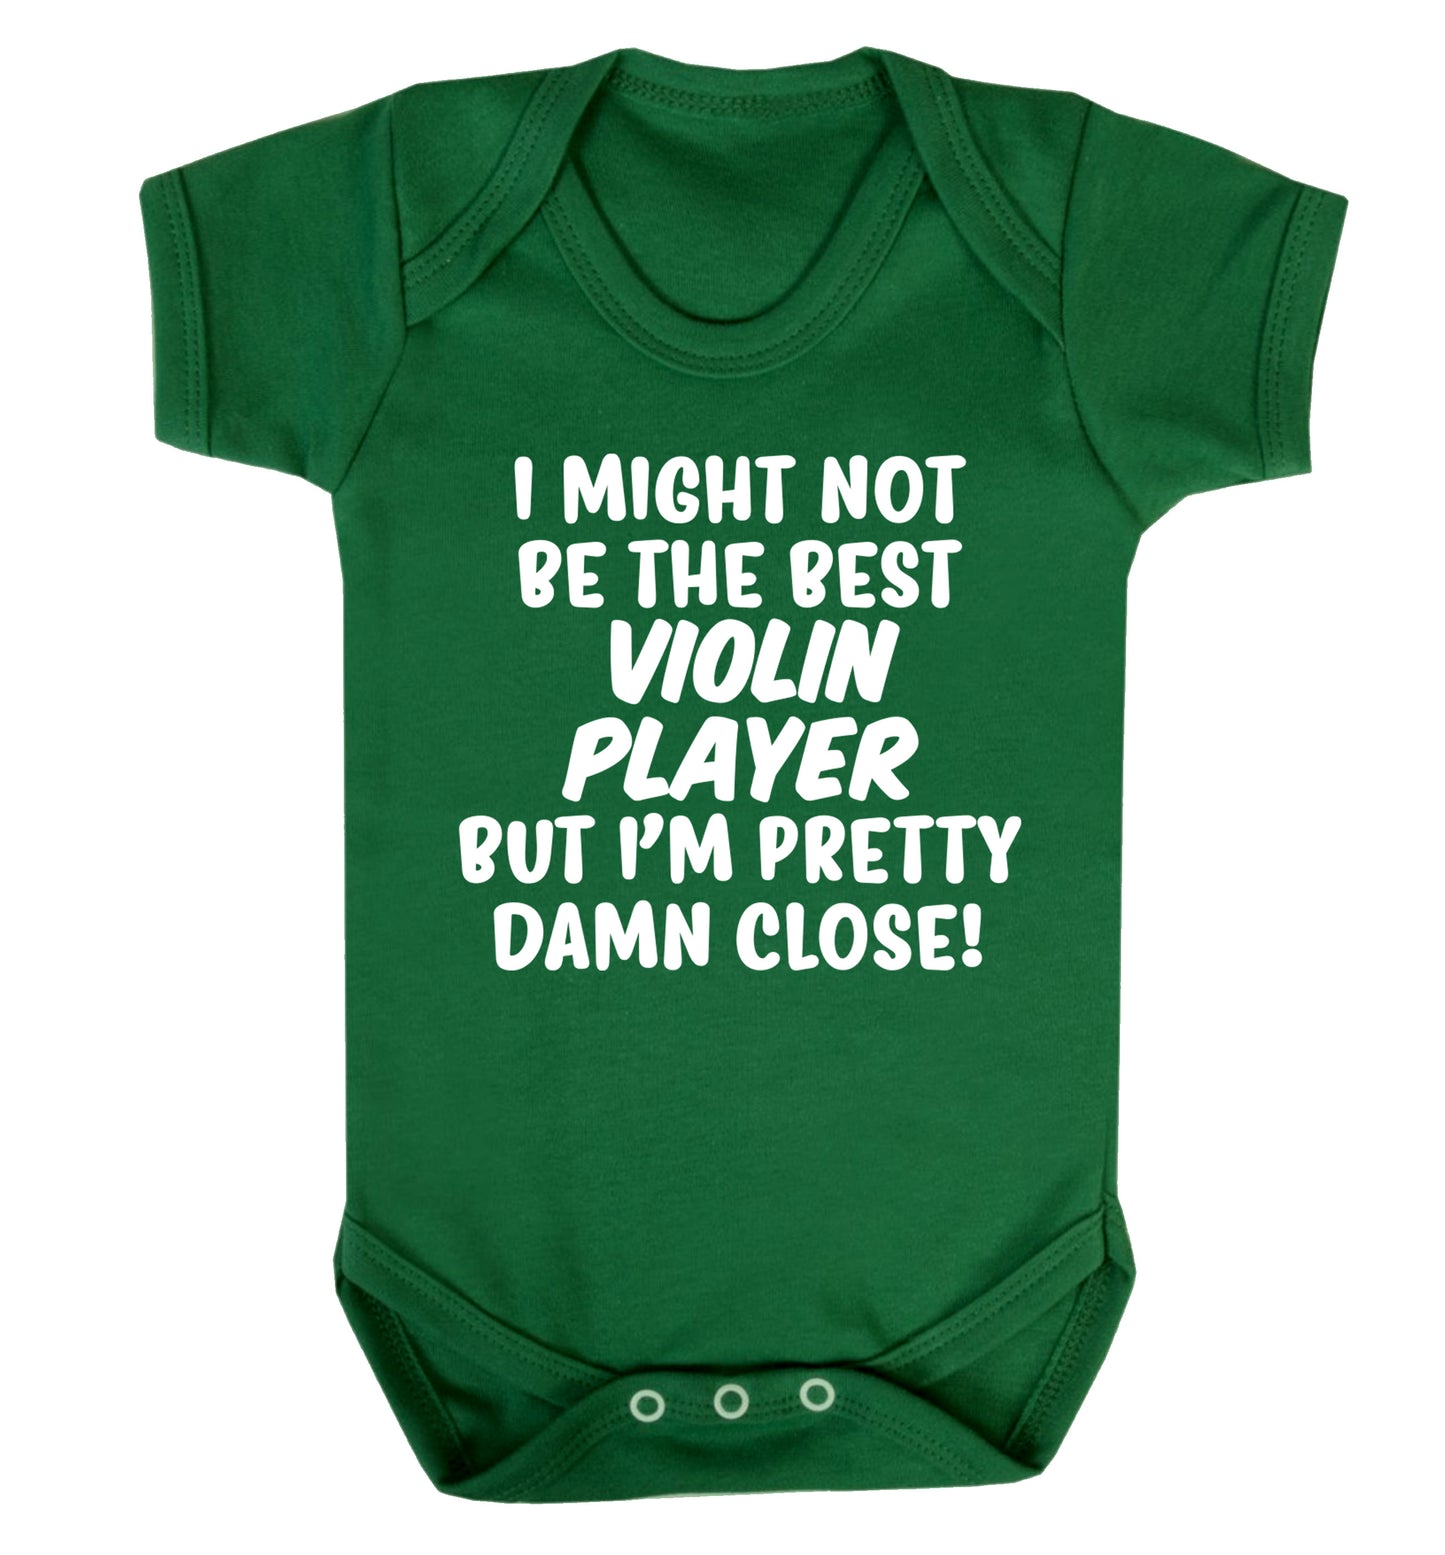 I might not be the best violin player but I'm pretty close Baby Vest green 18-24 months